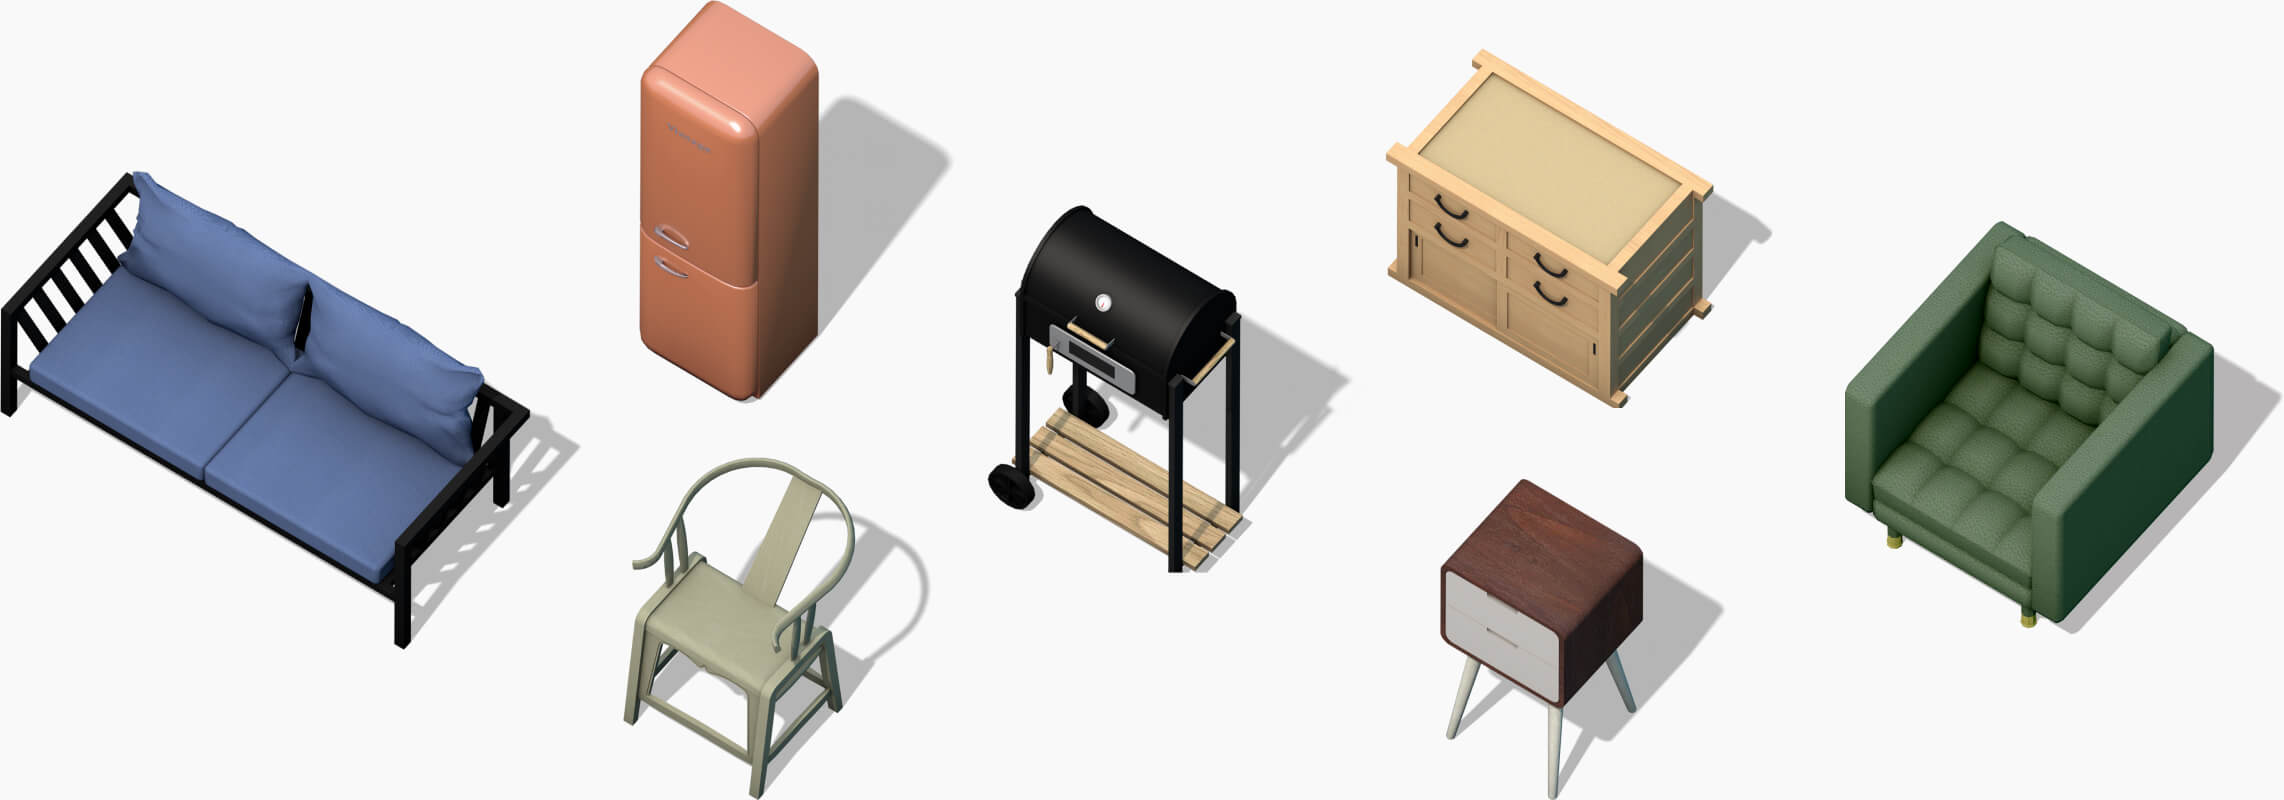 3D furniture objects preview.